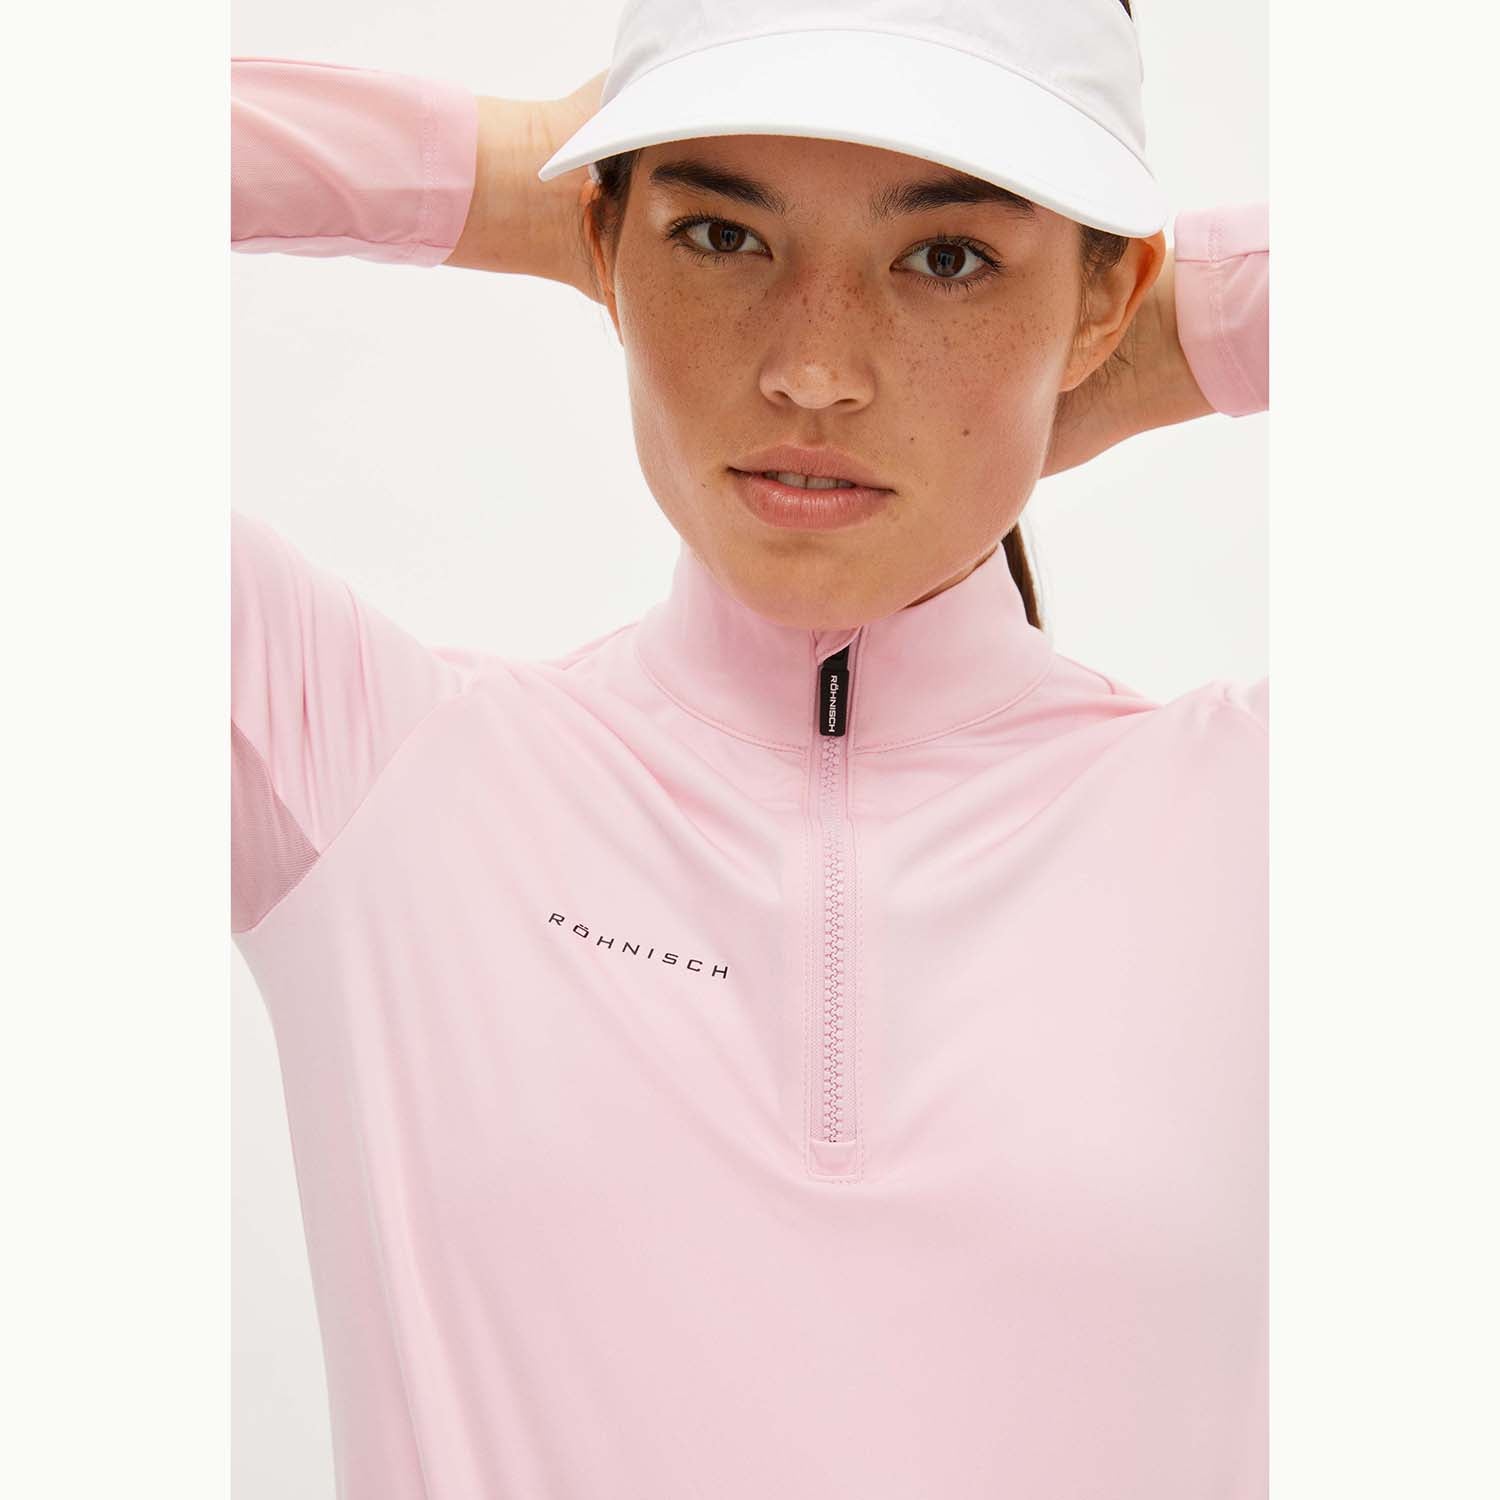 Rohnisch Women's Long Sleeve Top with UPF 50+ in Orchid Pink